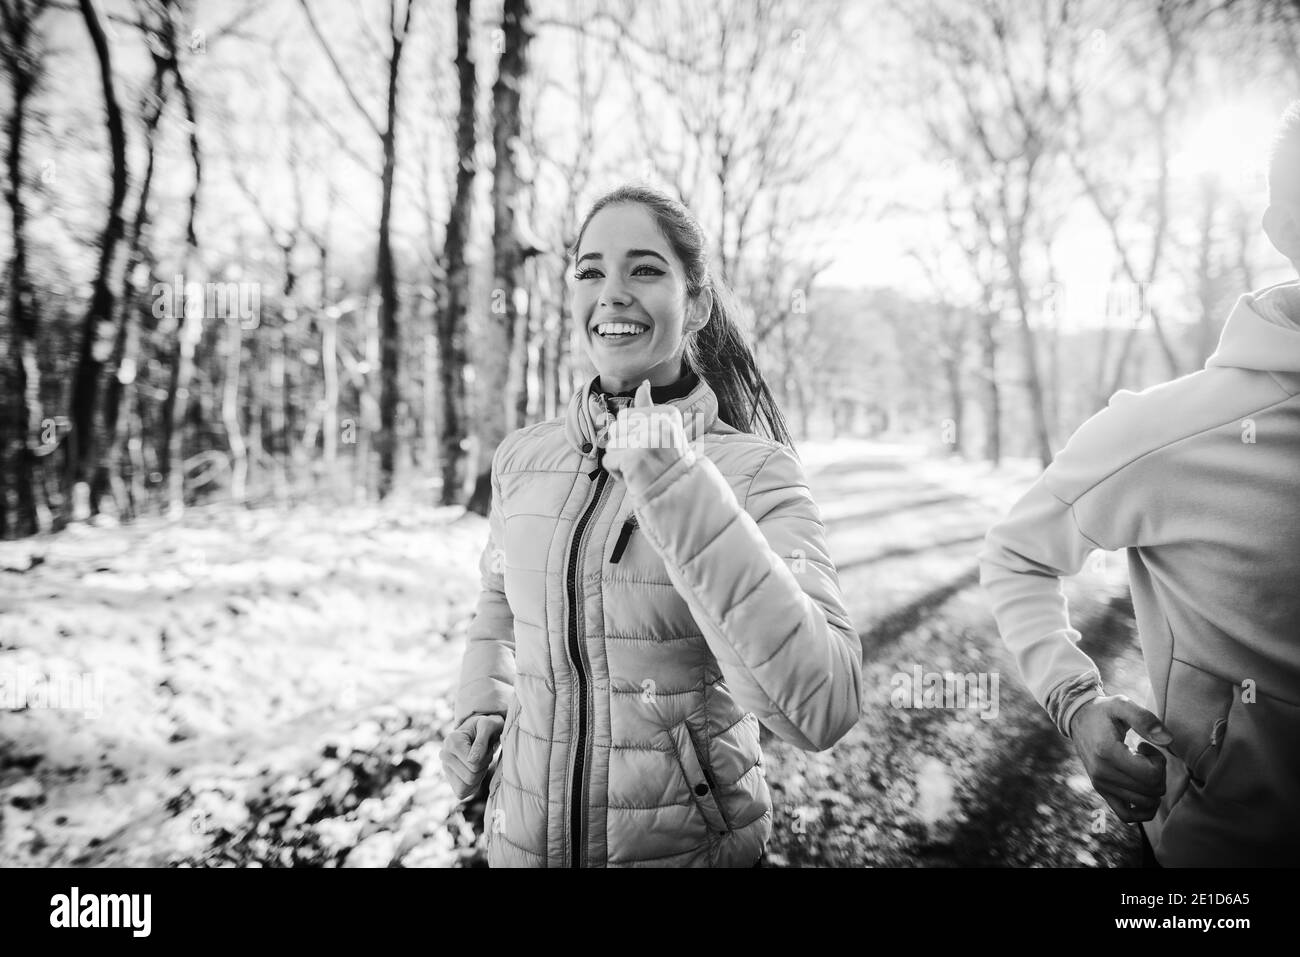 Couple running in nature in winter. Close up, black and white photo. Stock Photo